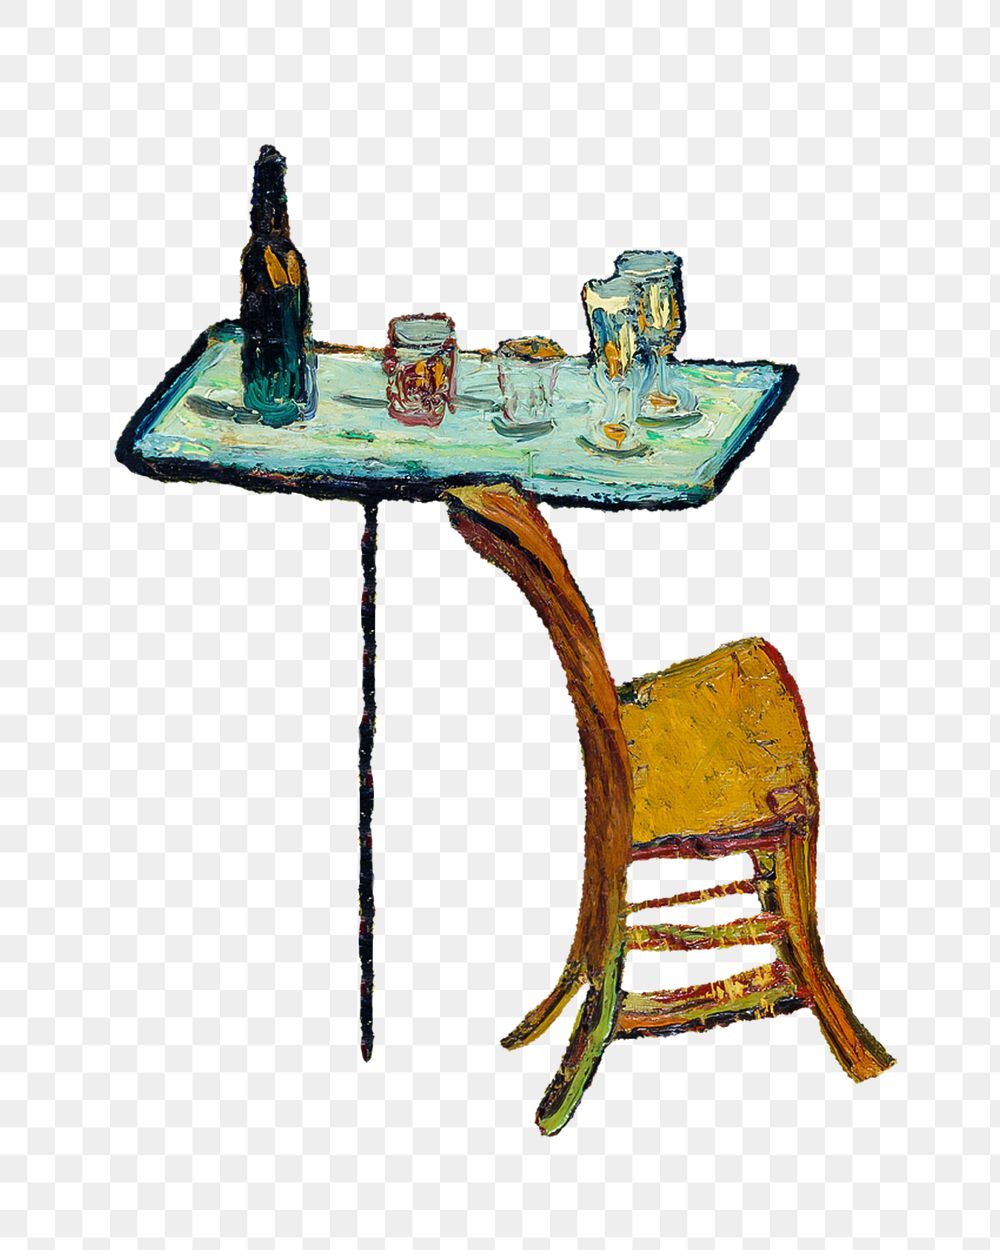 Van Gogh's png bar table sticker, transparent background. Remastered by rawpixel.